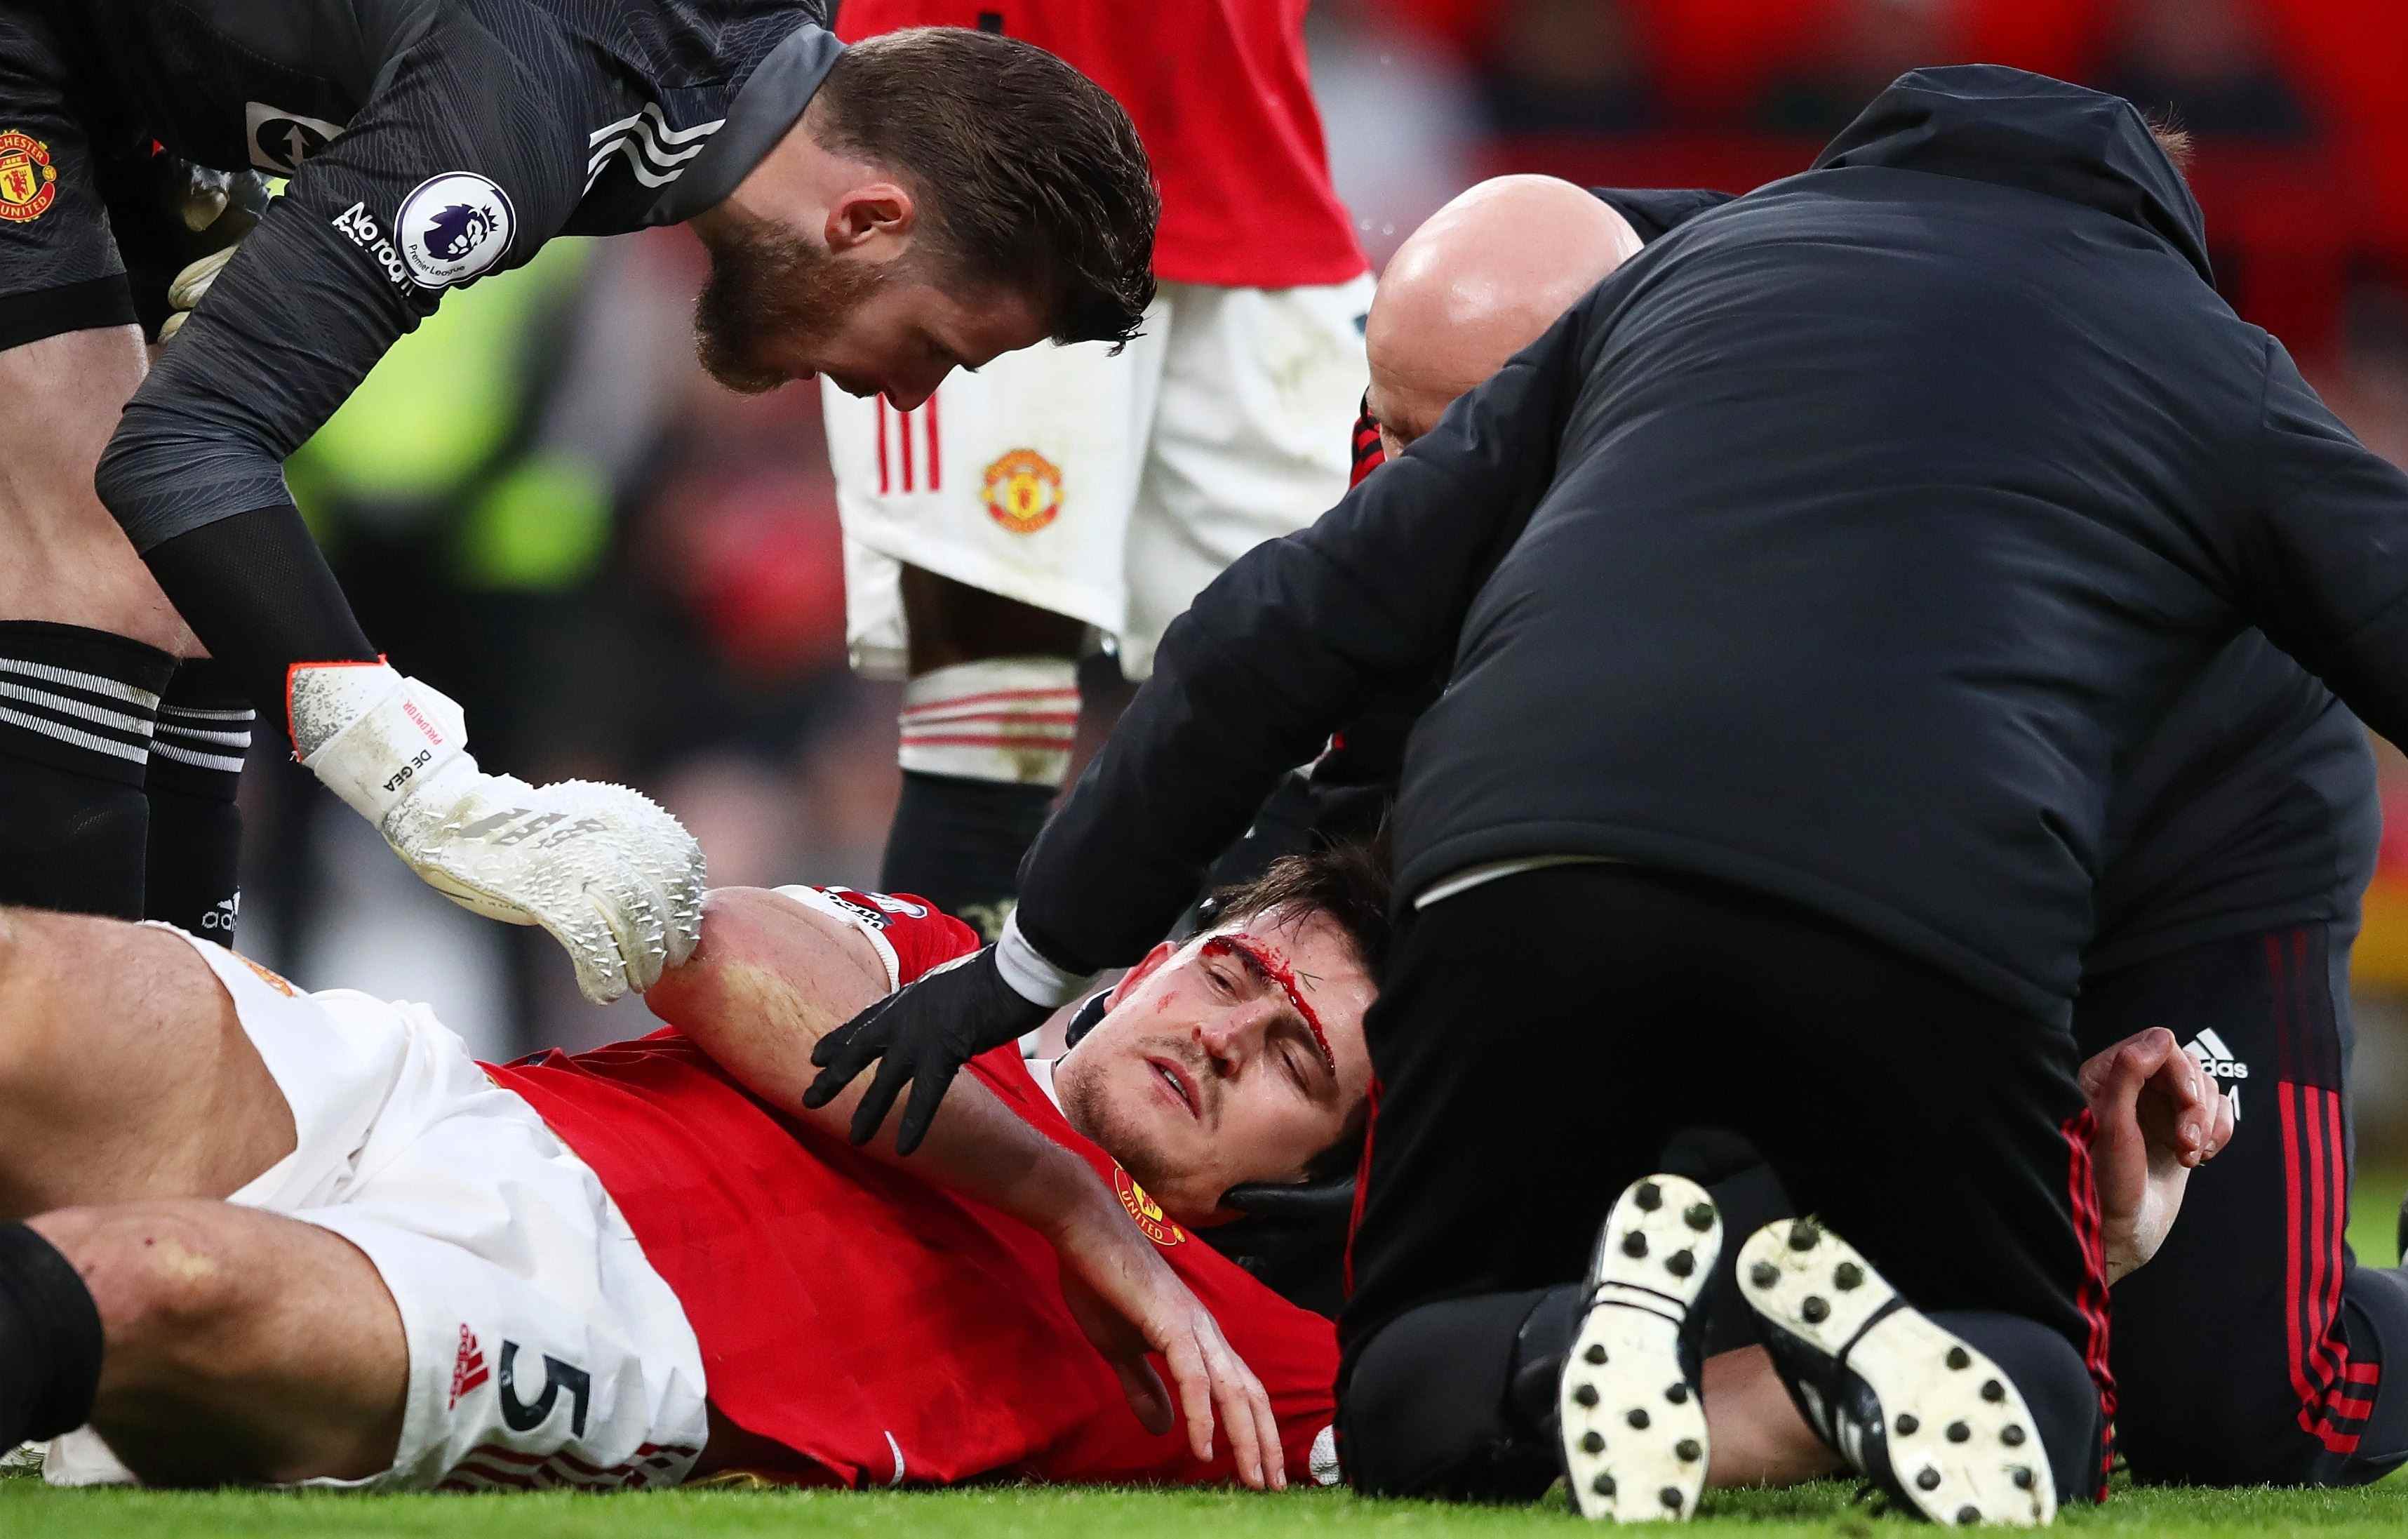 Maguire looked wounded as he lay stricken on the floor after the head clash